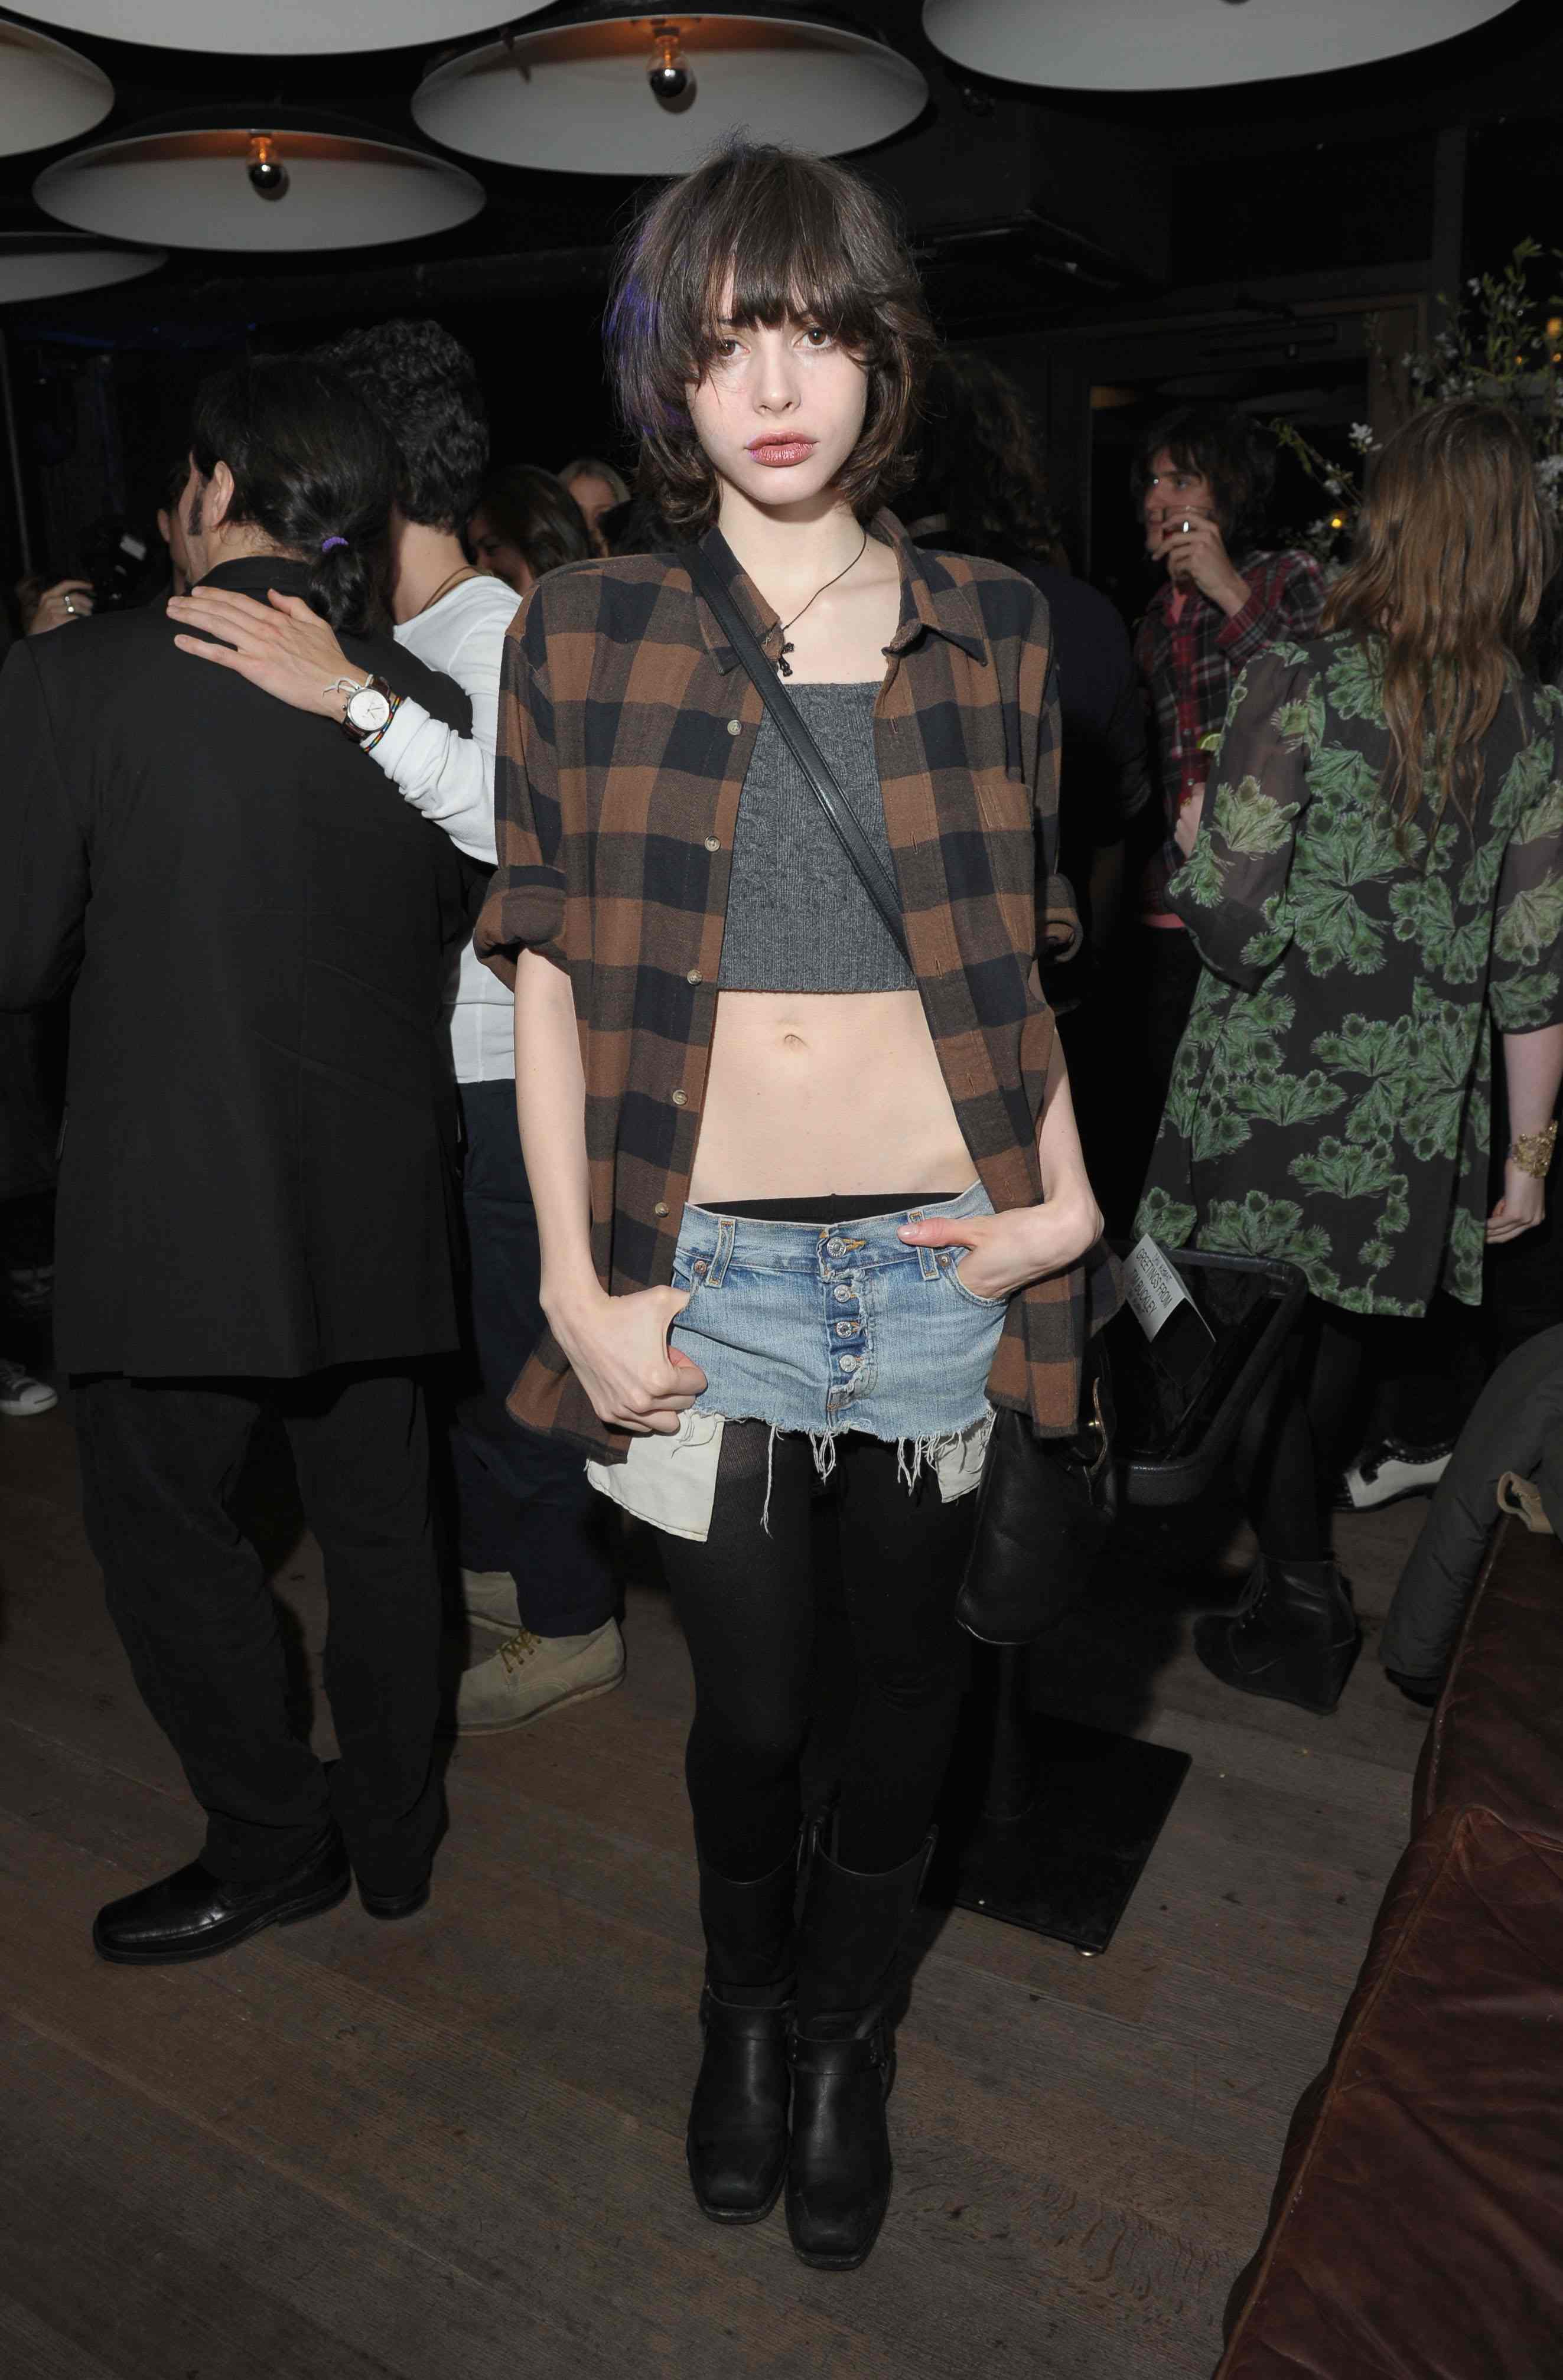 NEW YORK, NY - APRIL 23:  Charlotte Kemp Muhl attends theTribeca Film Festival 2013 After Party for "Greetings From Tim Buckley" sponsored by Bombay on April 23, 2013 in New York City.  (Photo by Michael Loccisano/Getty Images for 2013 Tribeca Film Festival)